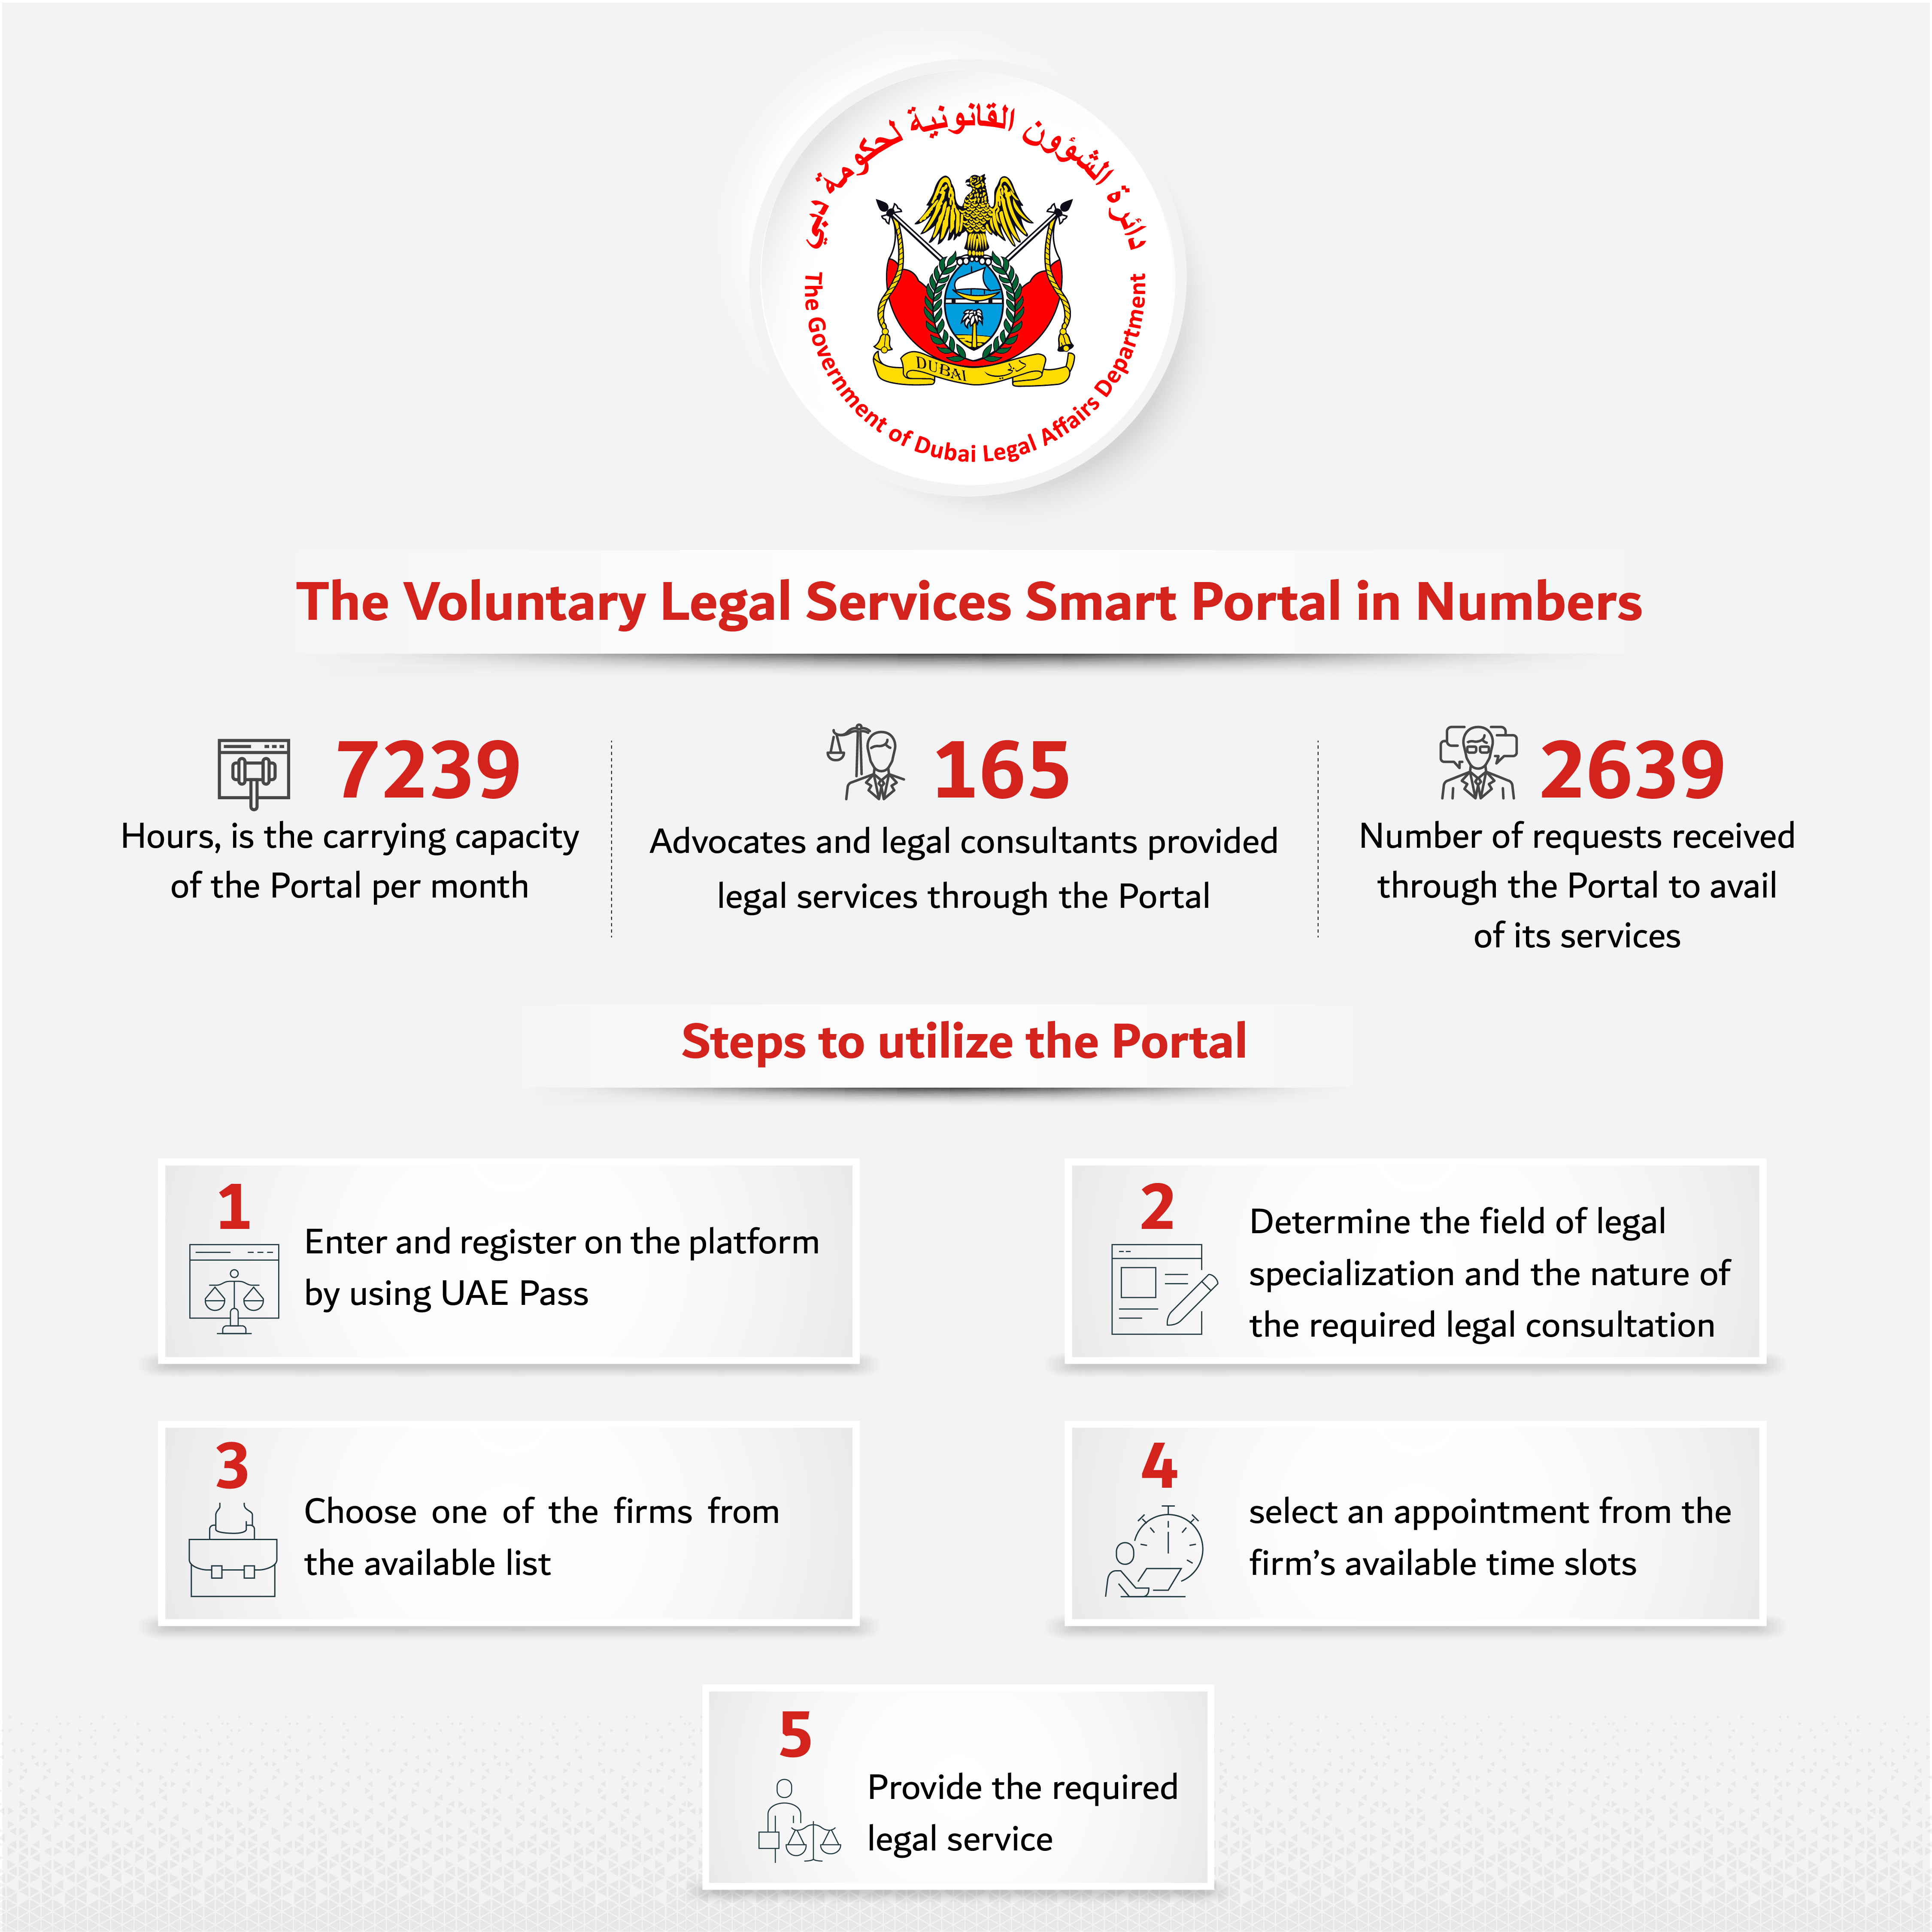 The Voluntary Legal Services Smart Portal Reflects the Supreme Values and Ethics of the Legal Profession